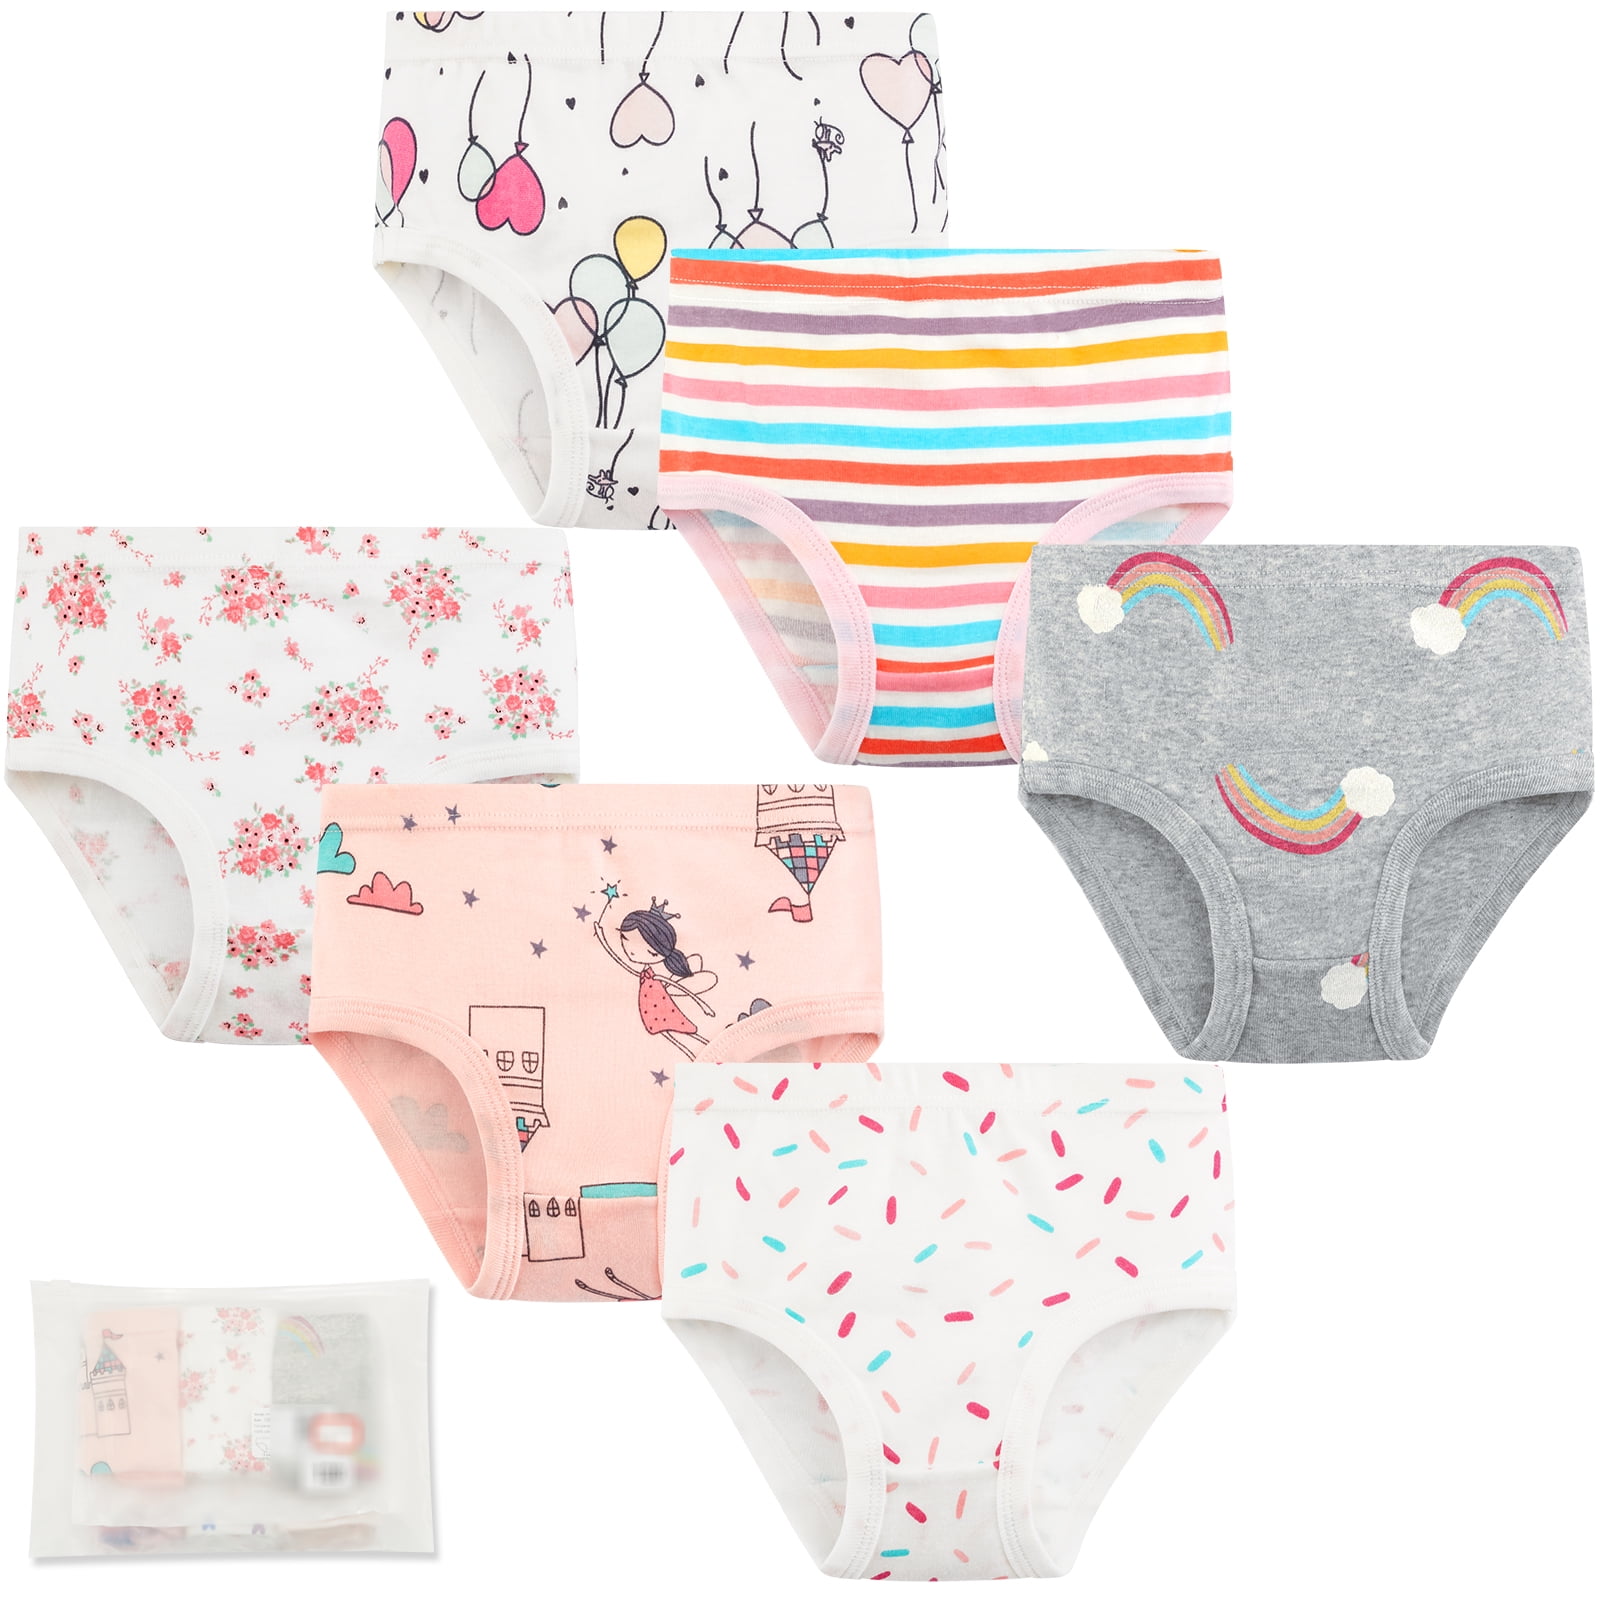 Kids Custom Handmade Cotton Underwear Elastic-free Wedgie-free Many Colors  & Cute Patterns Available 